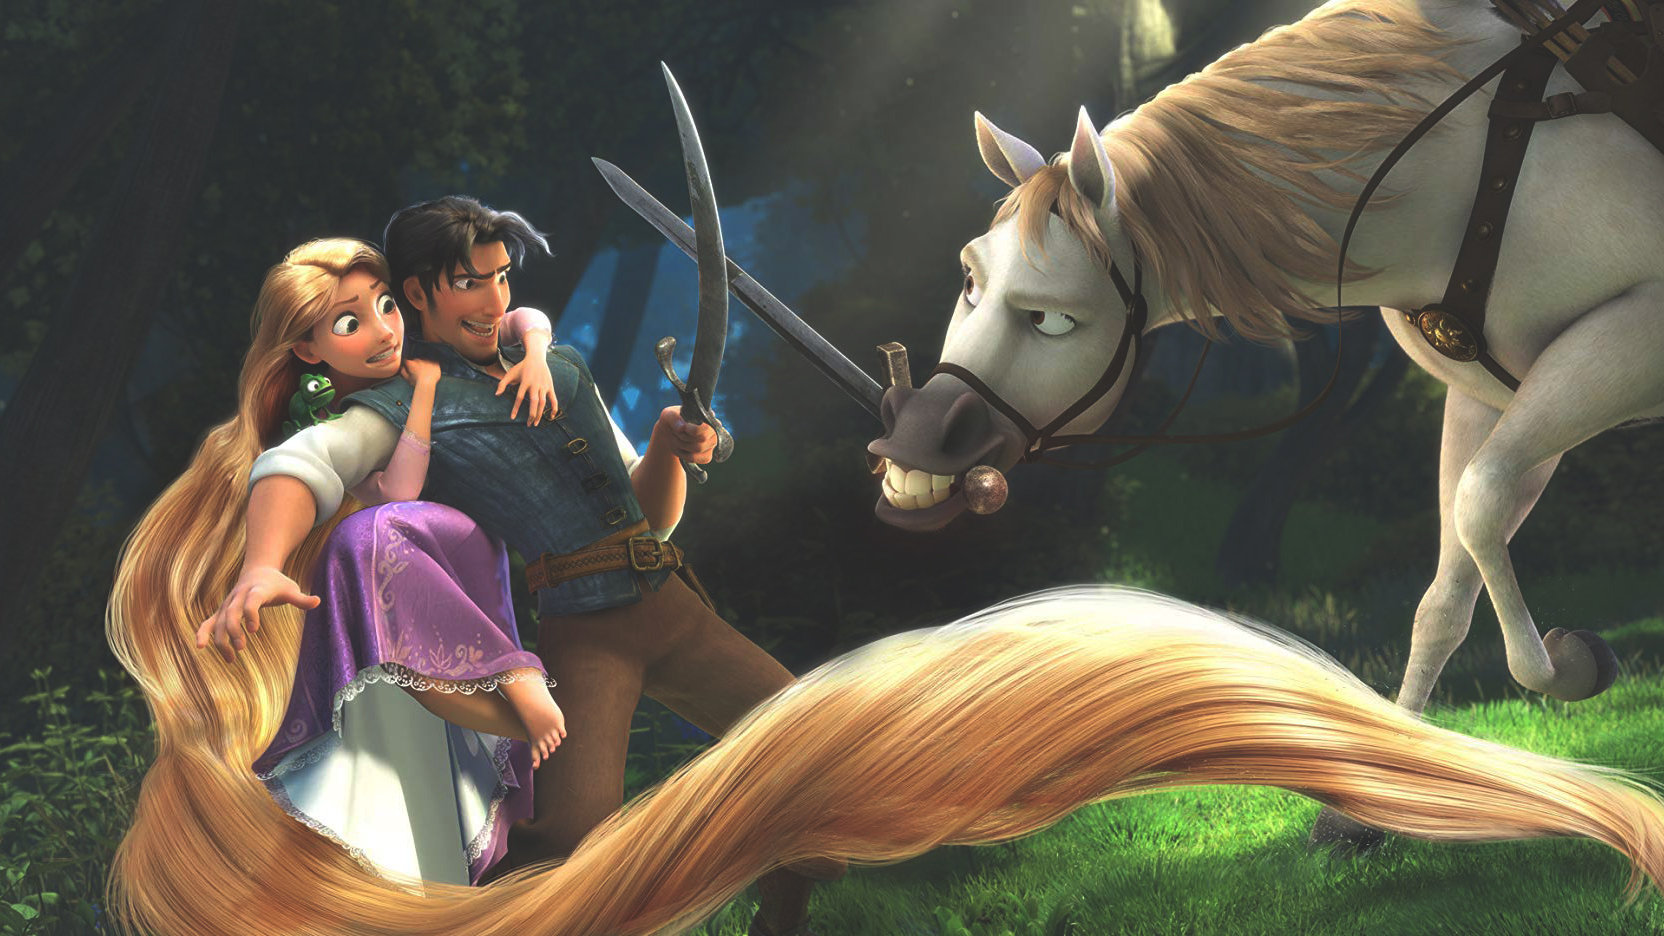 Add Tangled (2010) to your Disney film collection today!